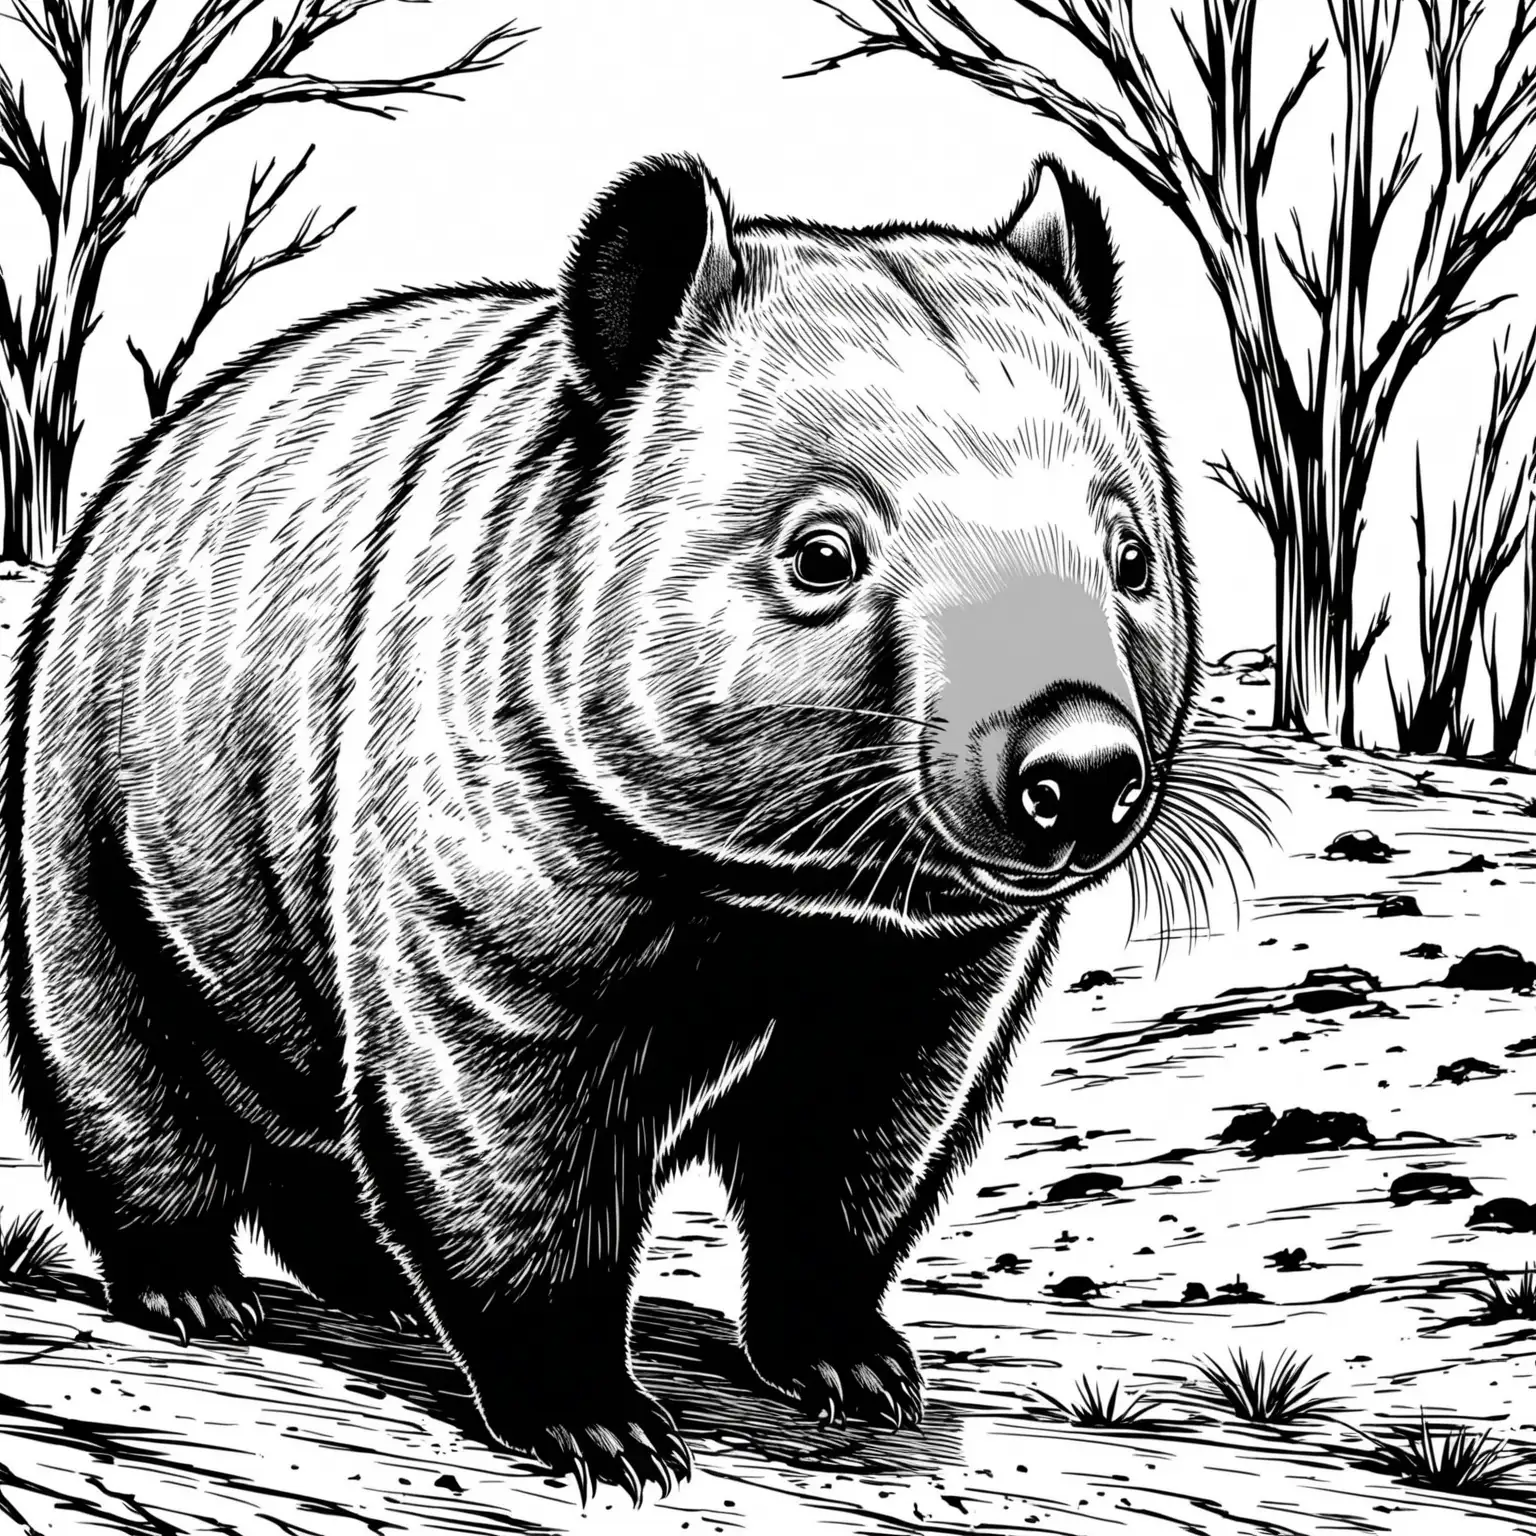 CloseUp Black and White Drawing of a Wombat in the Australian Outback